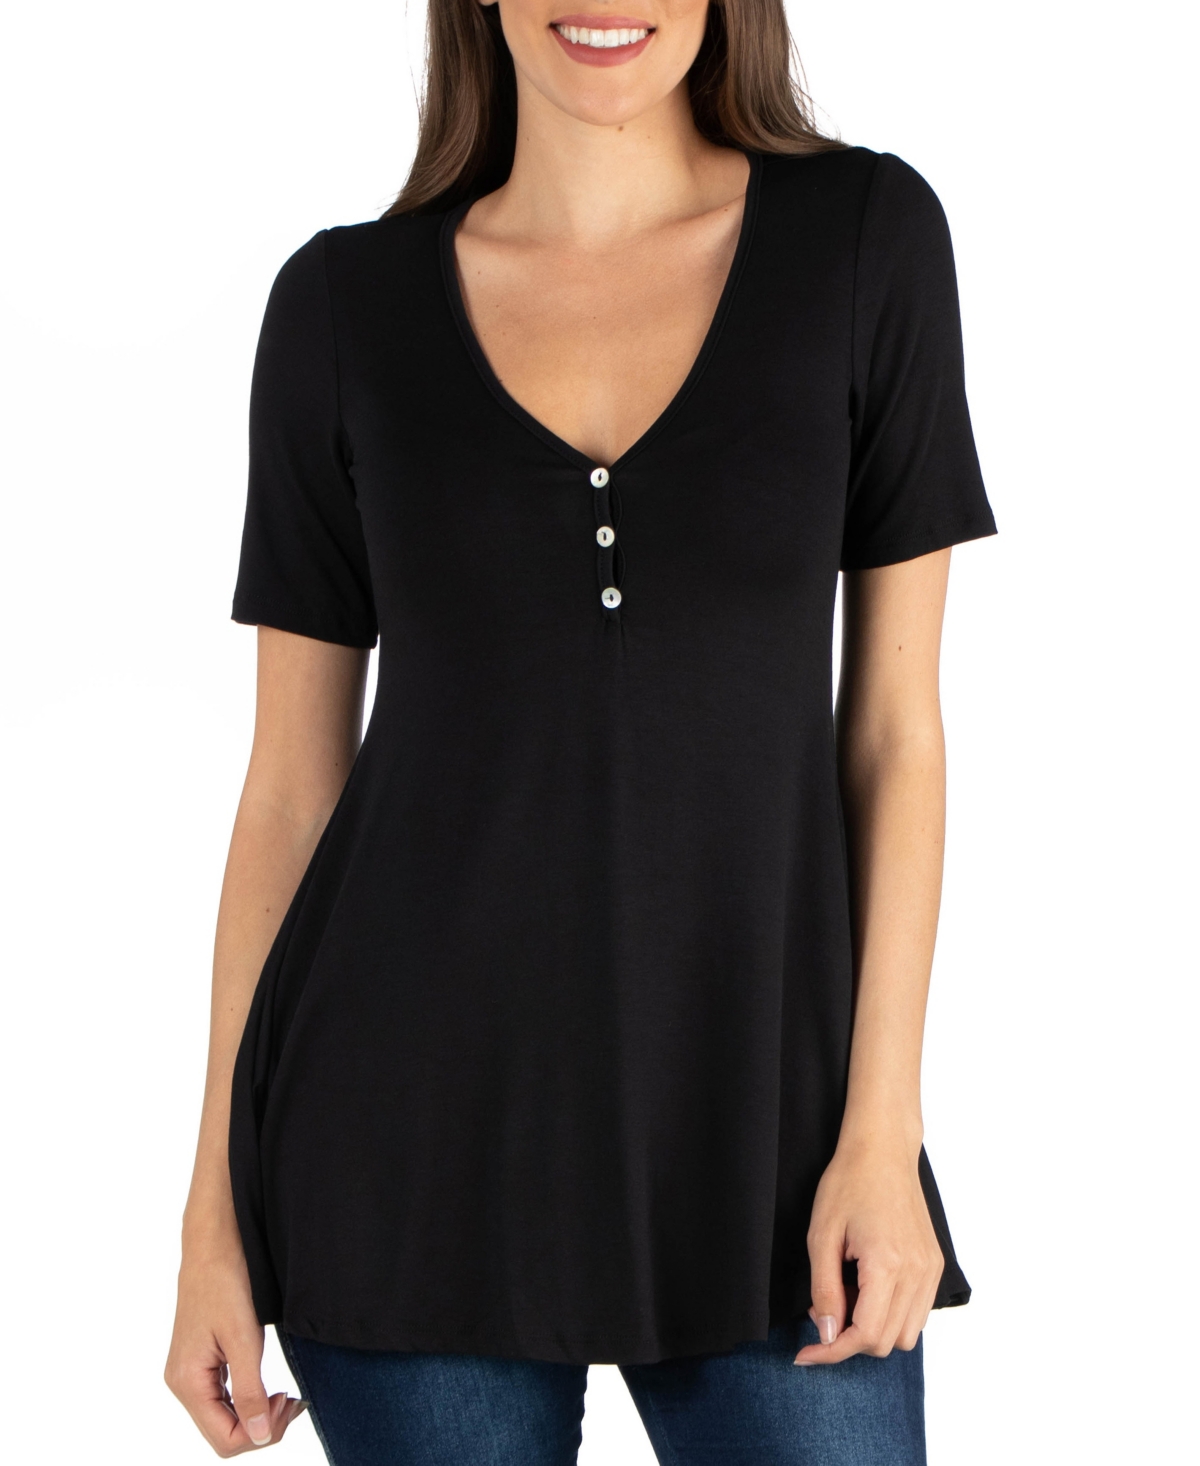  24seven Comfort Apparel Quarter Sleeve Tunic Top with Button Detail